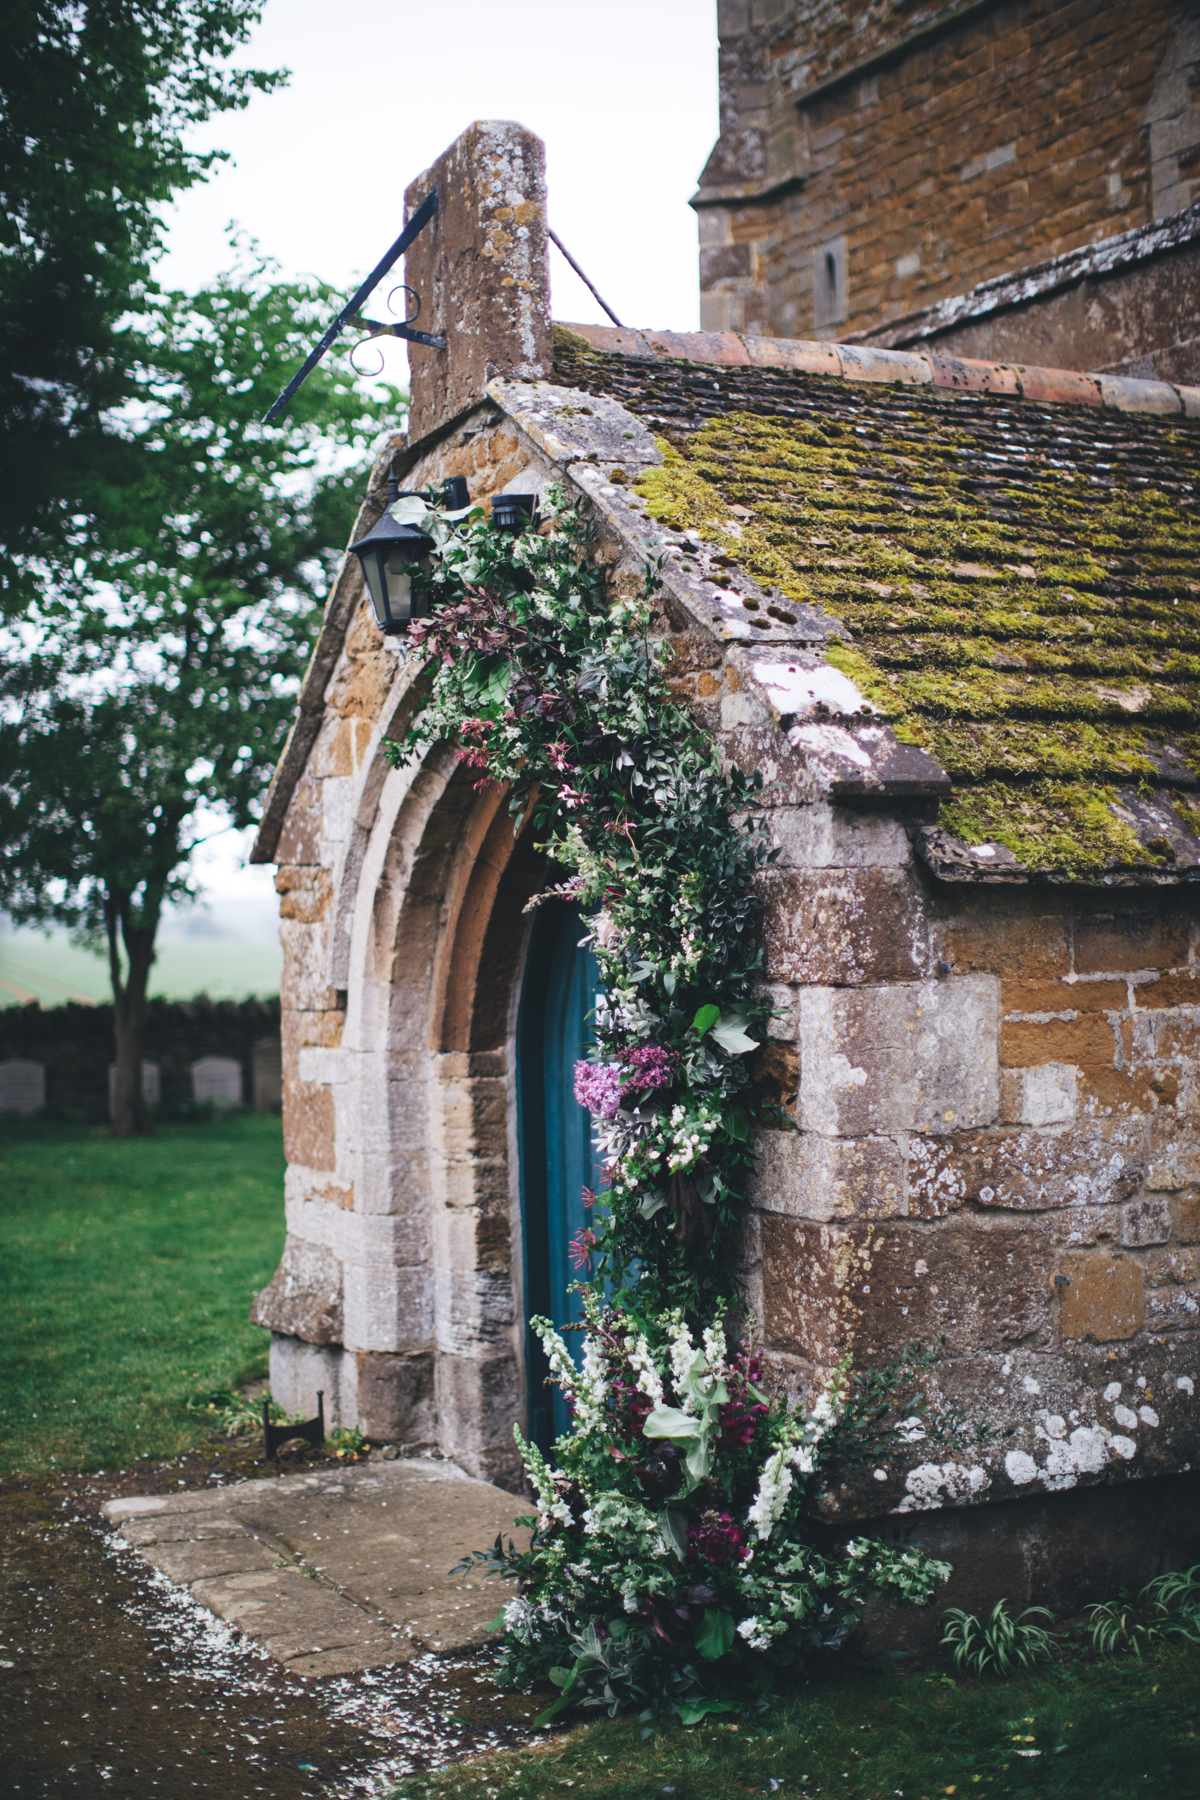 Entrance of a church with a tall floral decoration surrounding the doorway